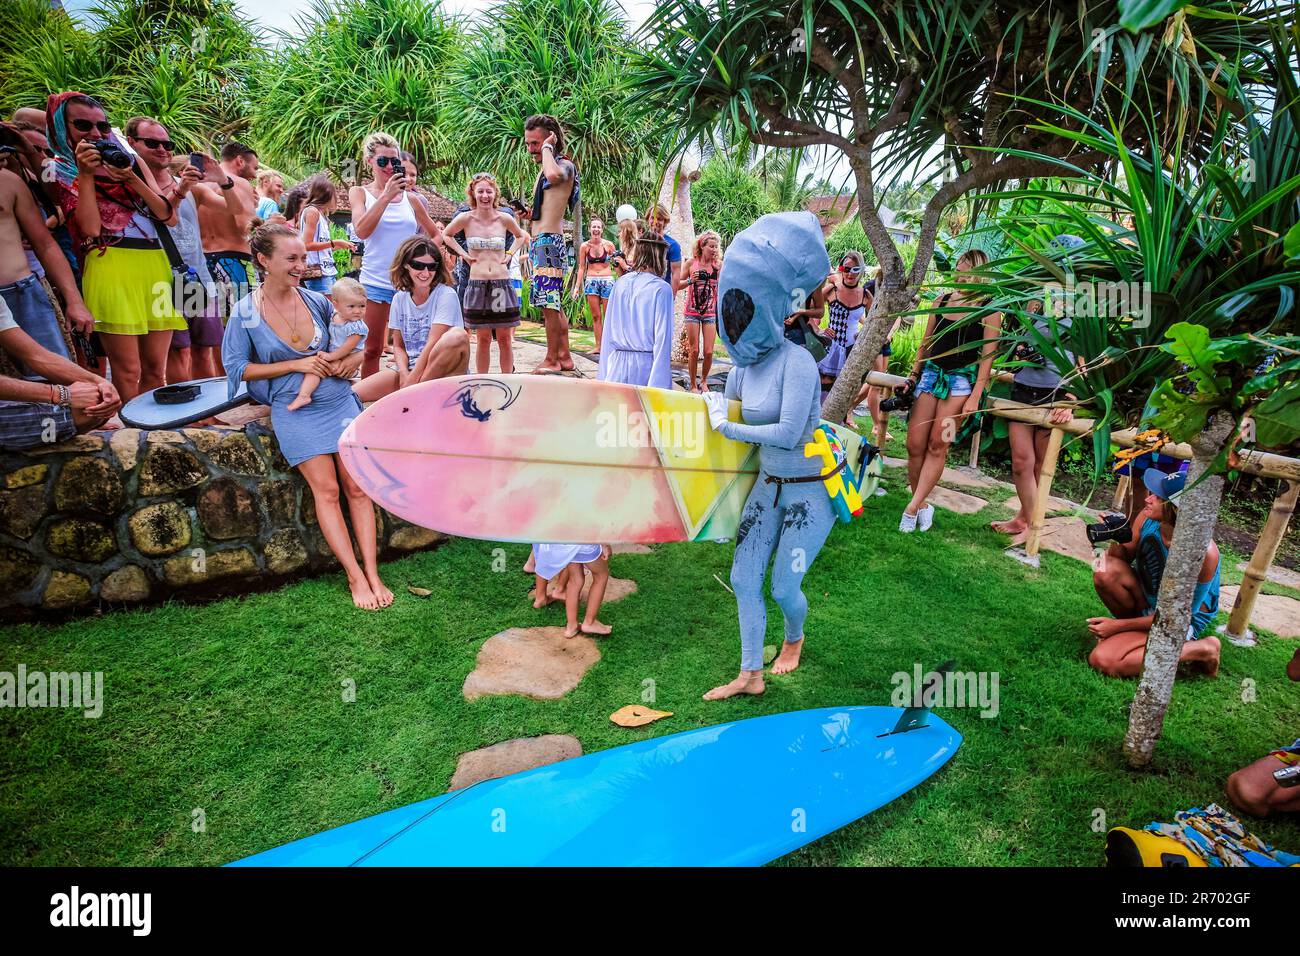 Surf in a carnival costumes, Bali, Indonesia. Stock Photo